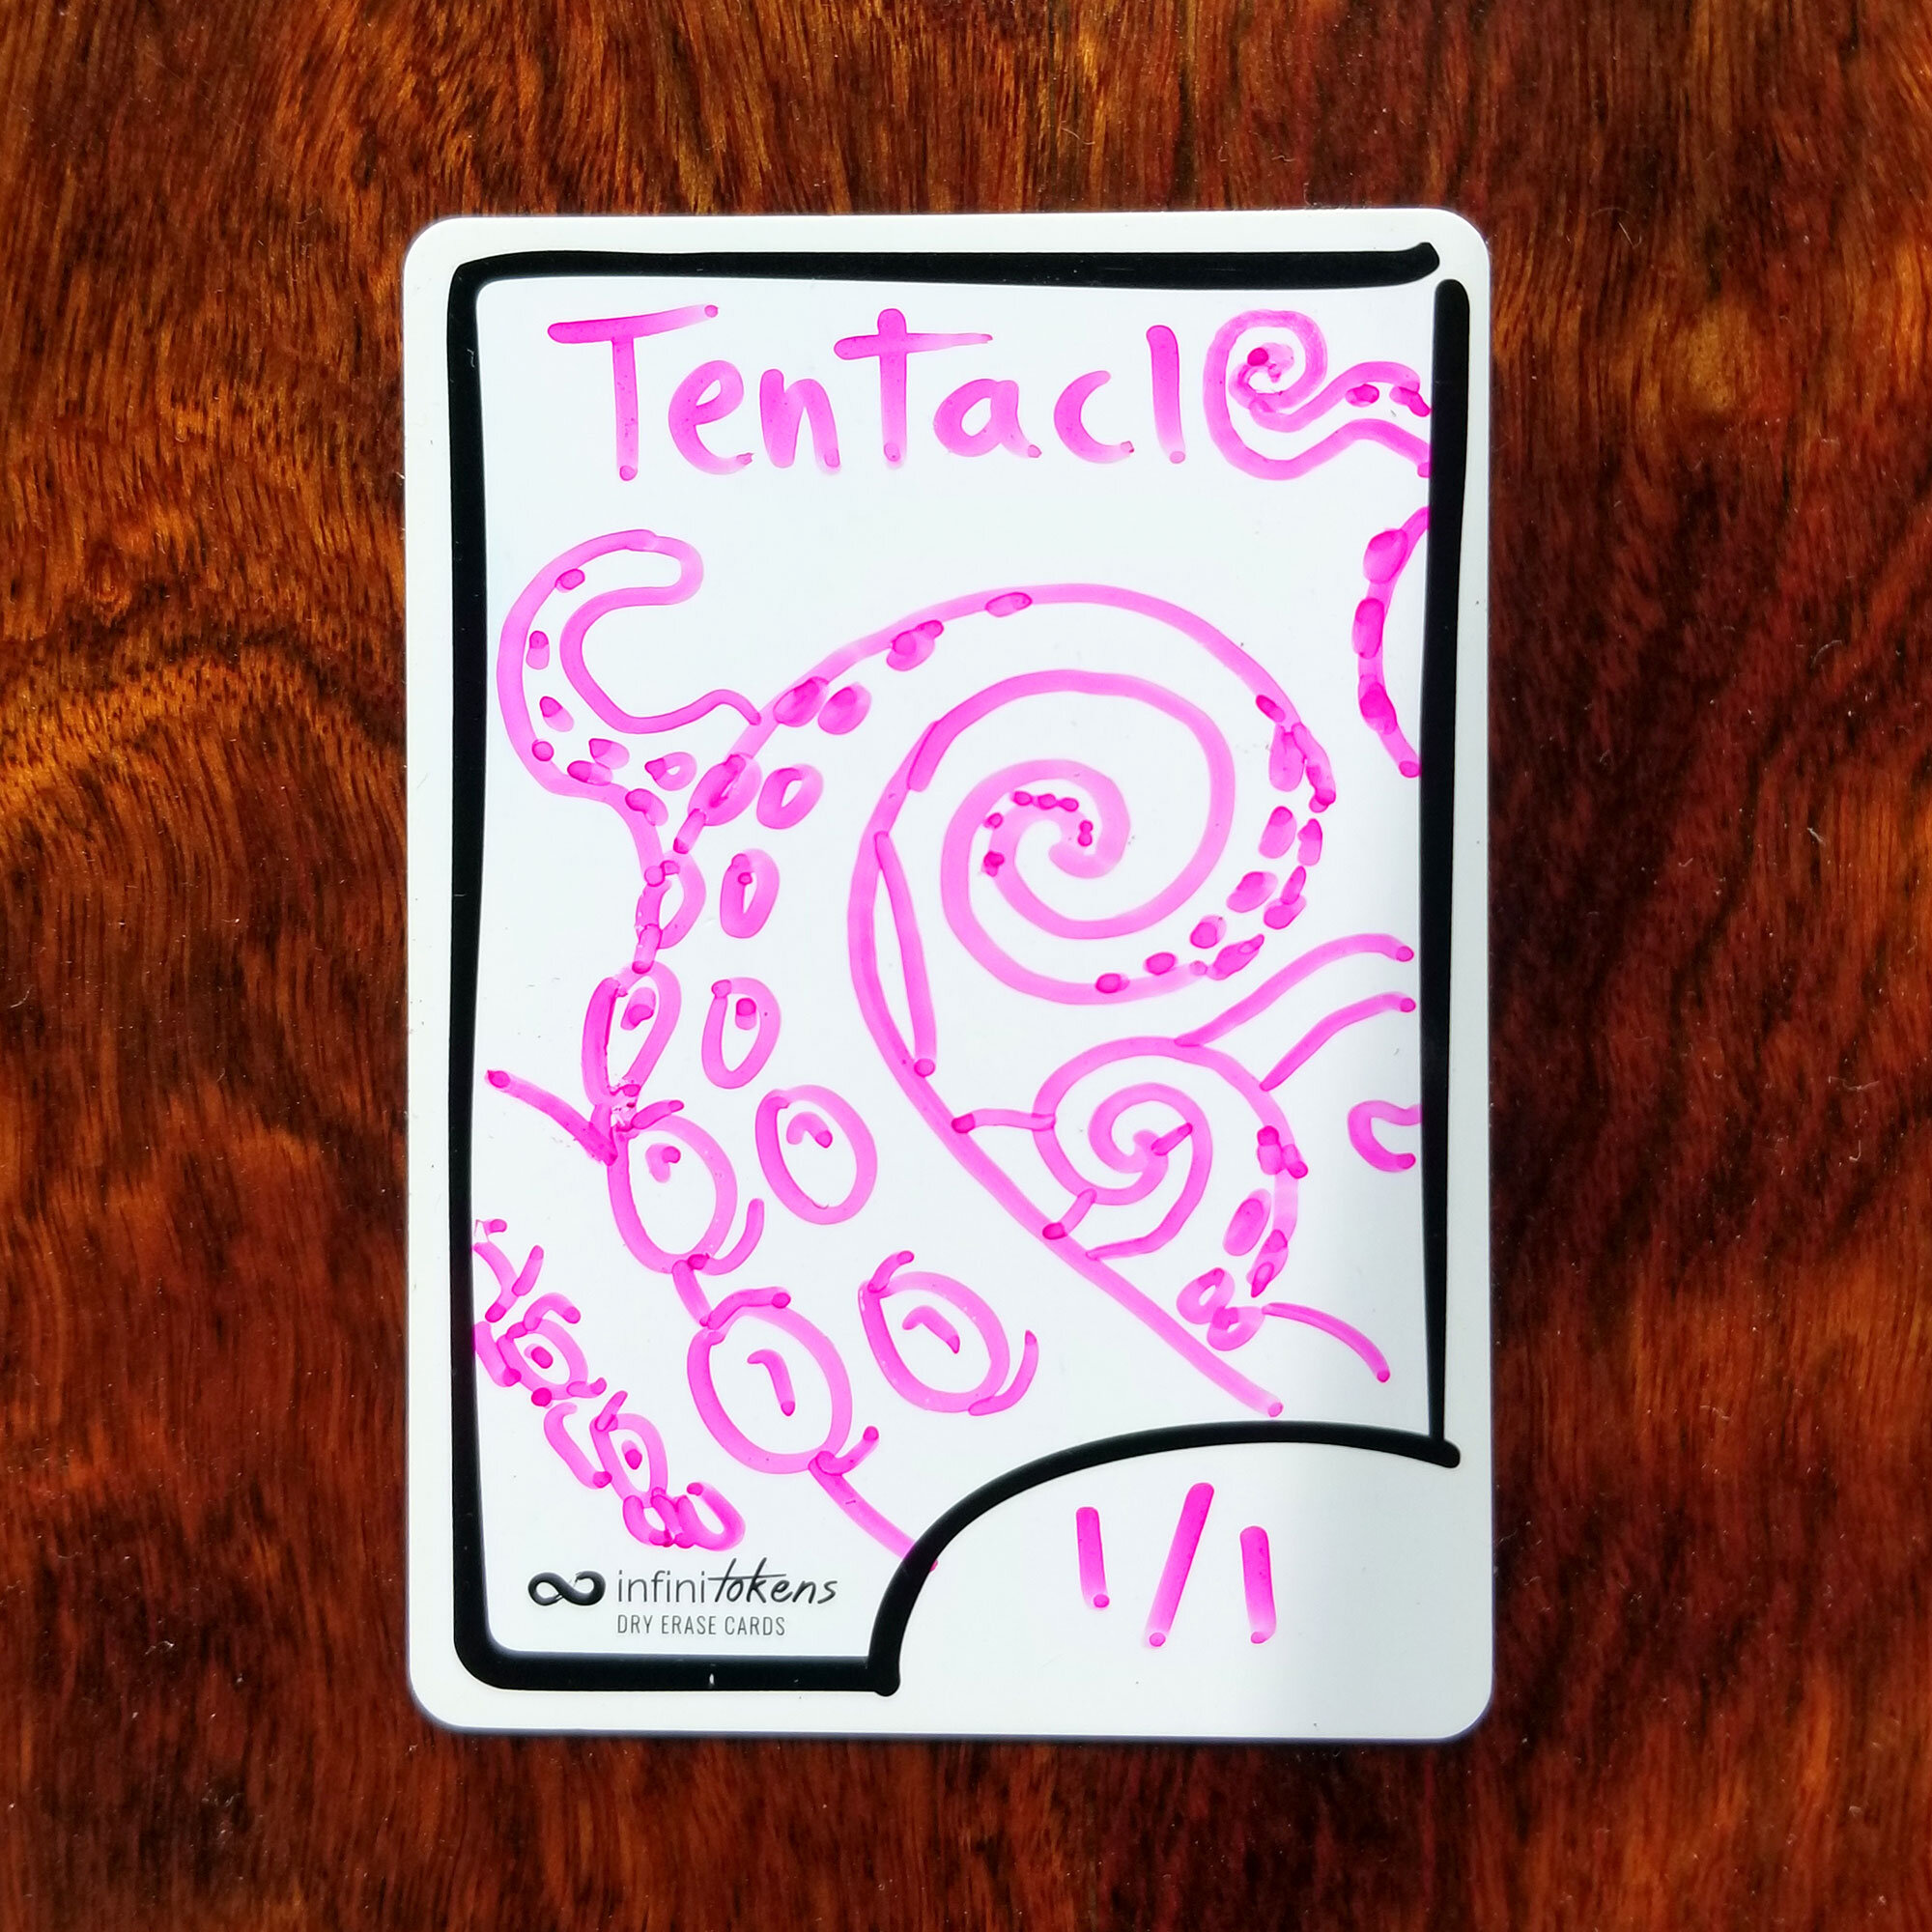 Day 4 - Tentacle